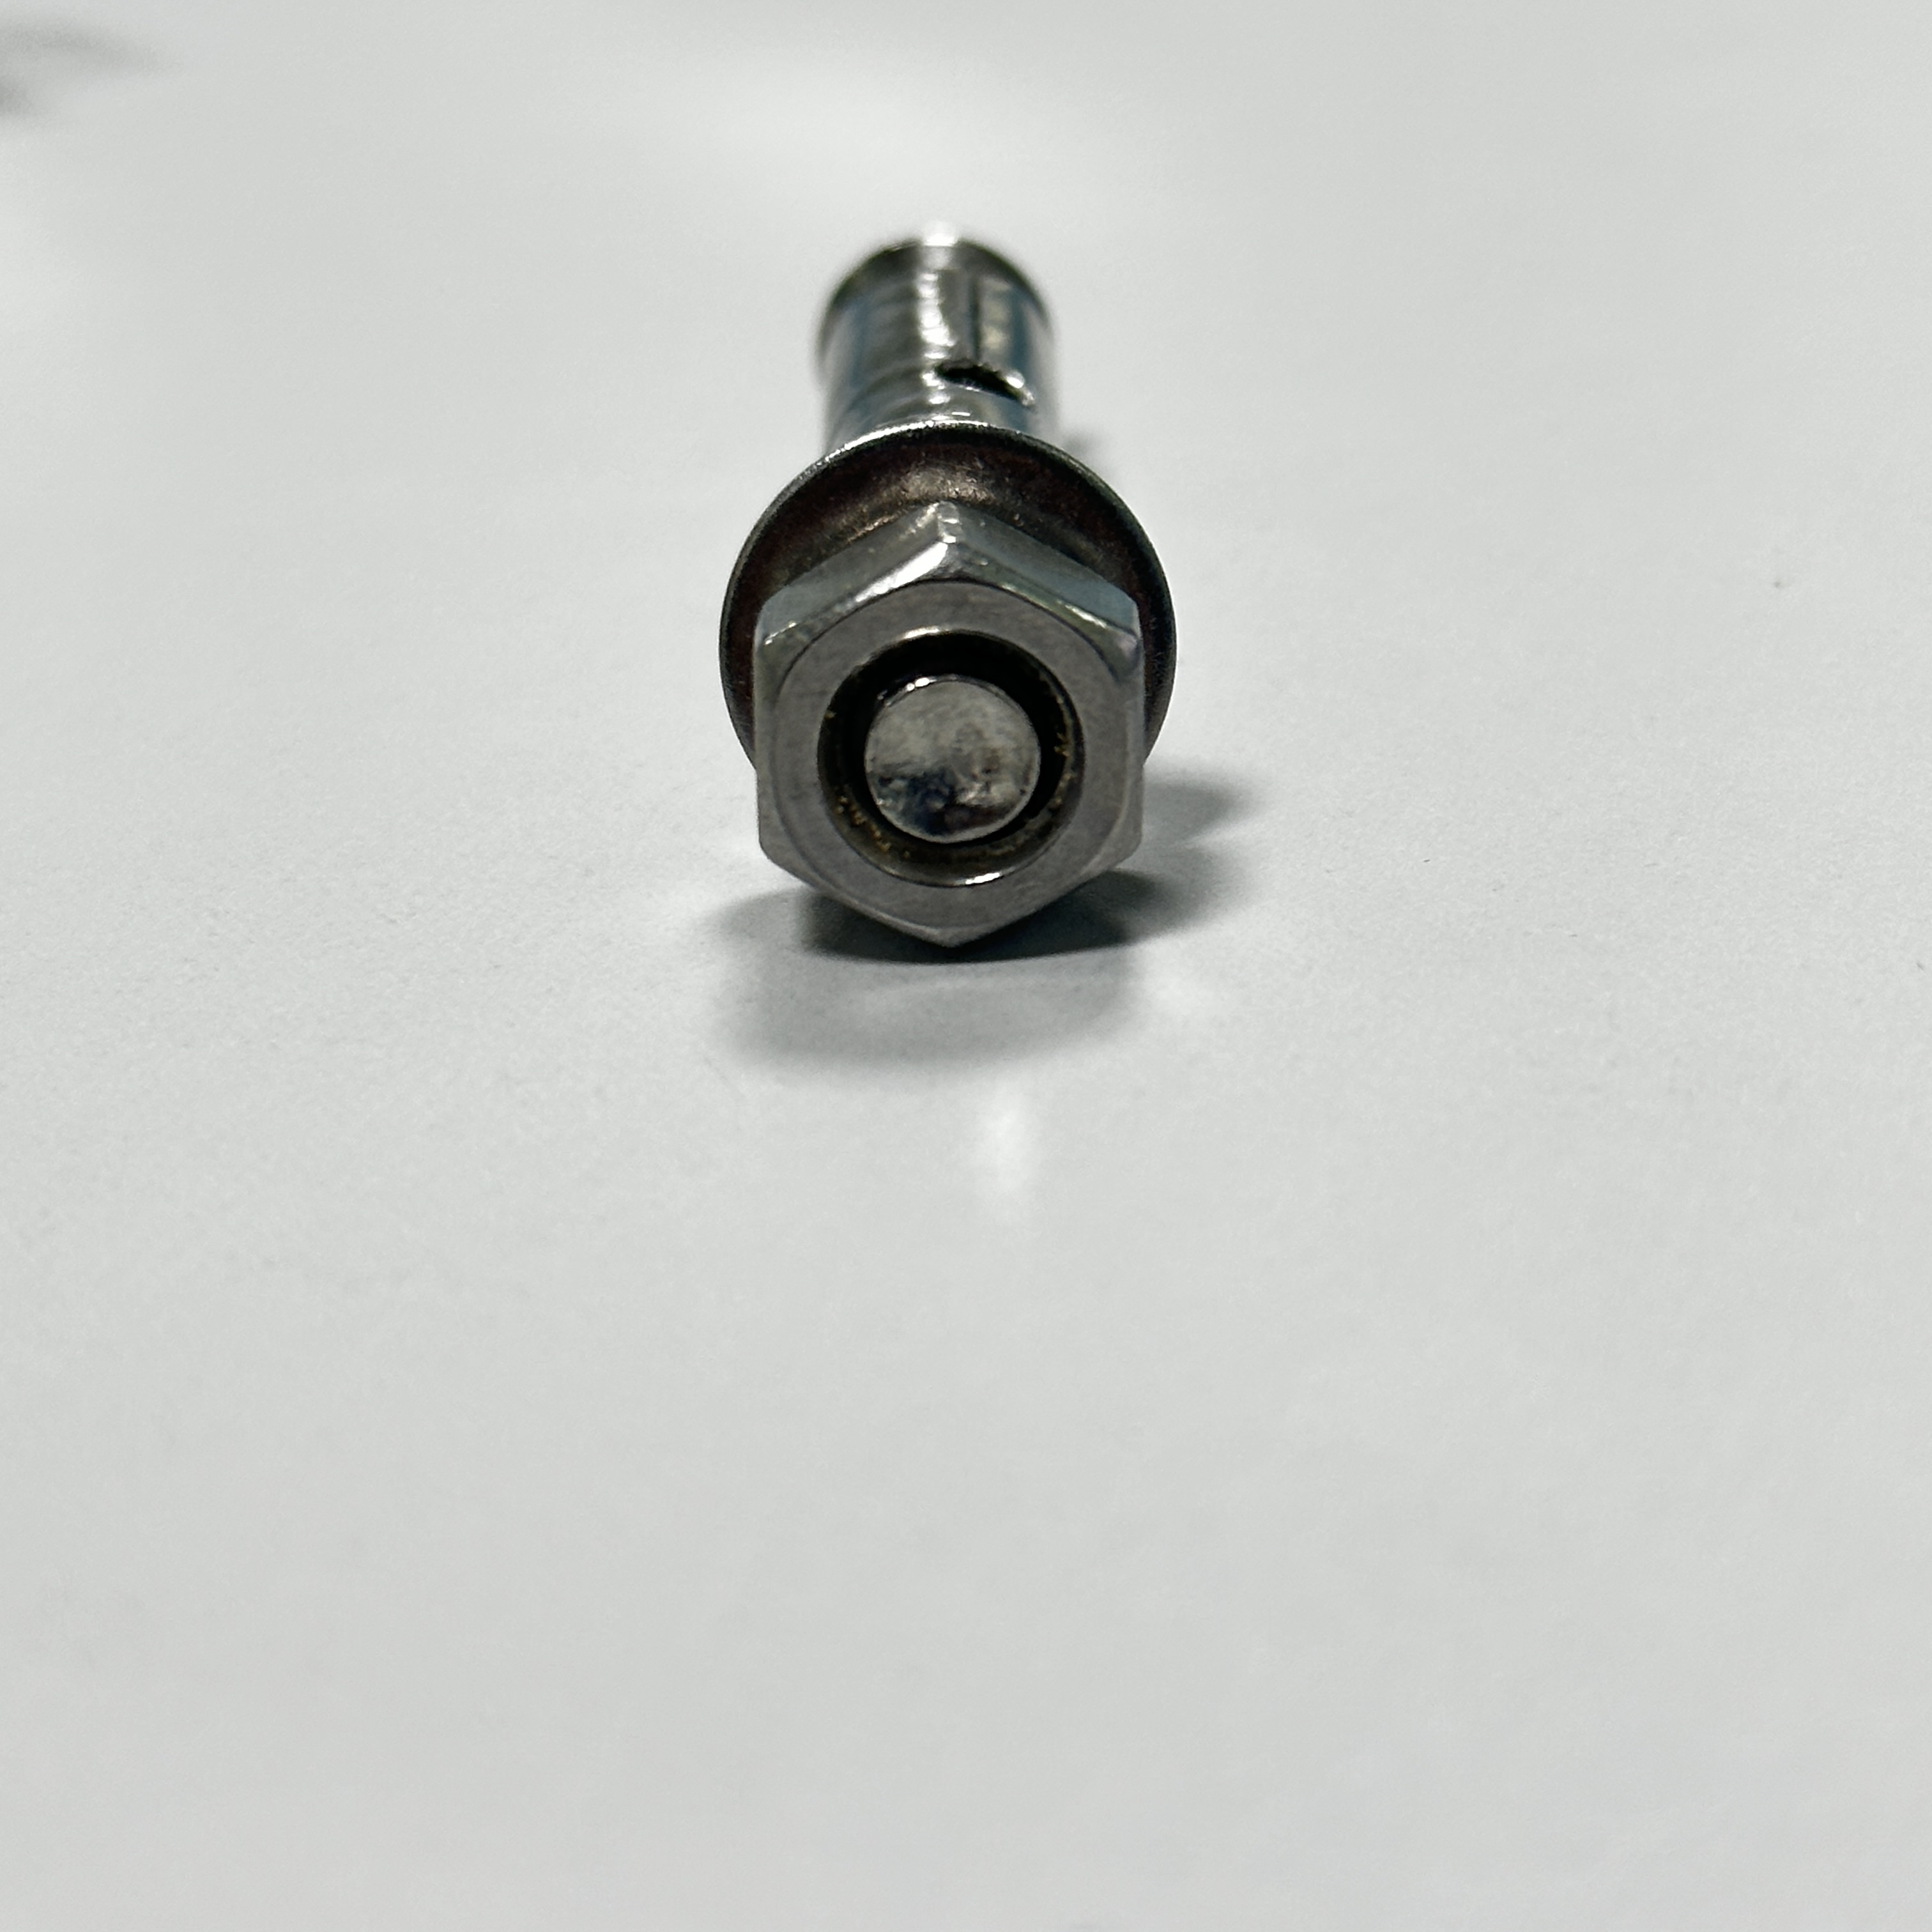 How to unscrew the stainless steel expansion screw if it is rusted?